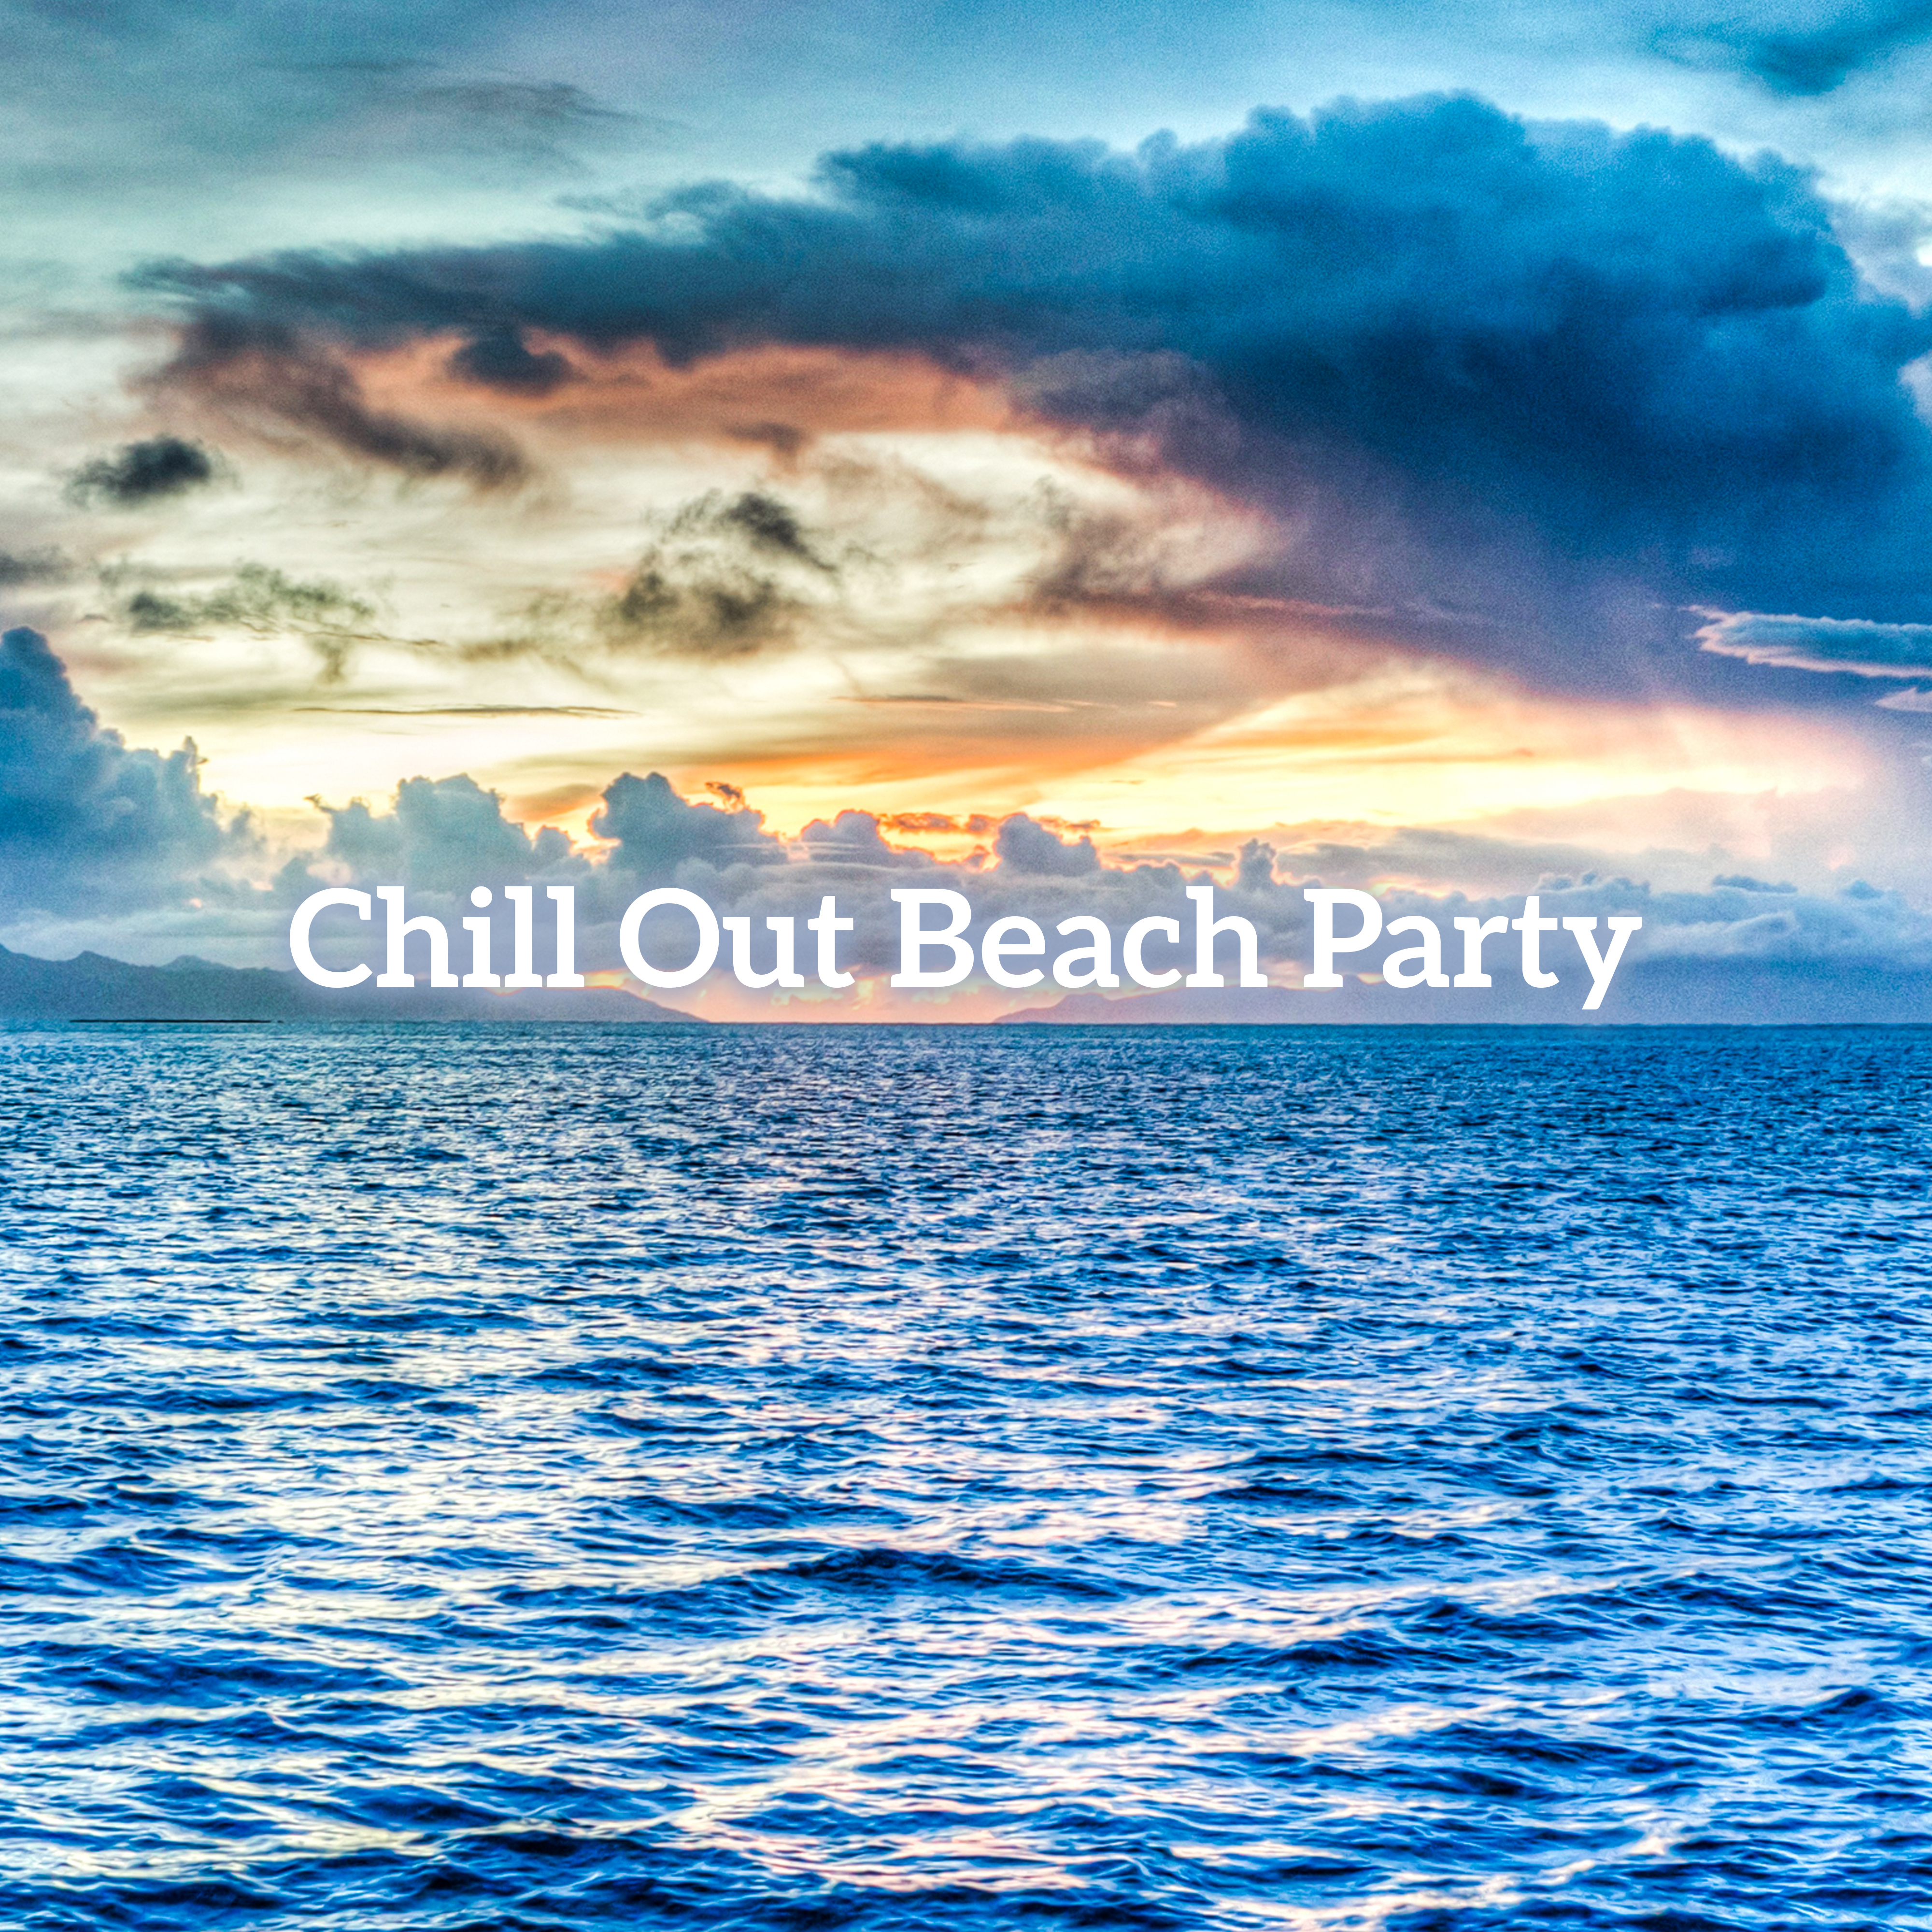 Chill Out Beach Party